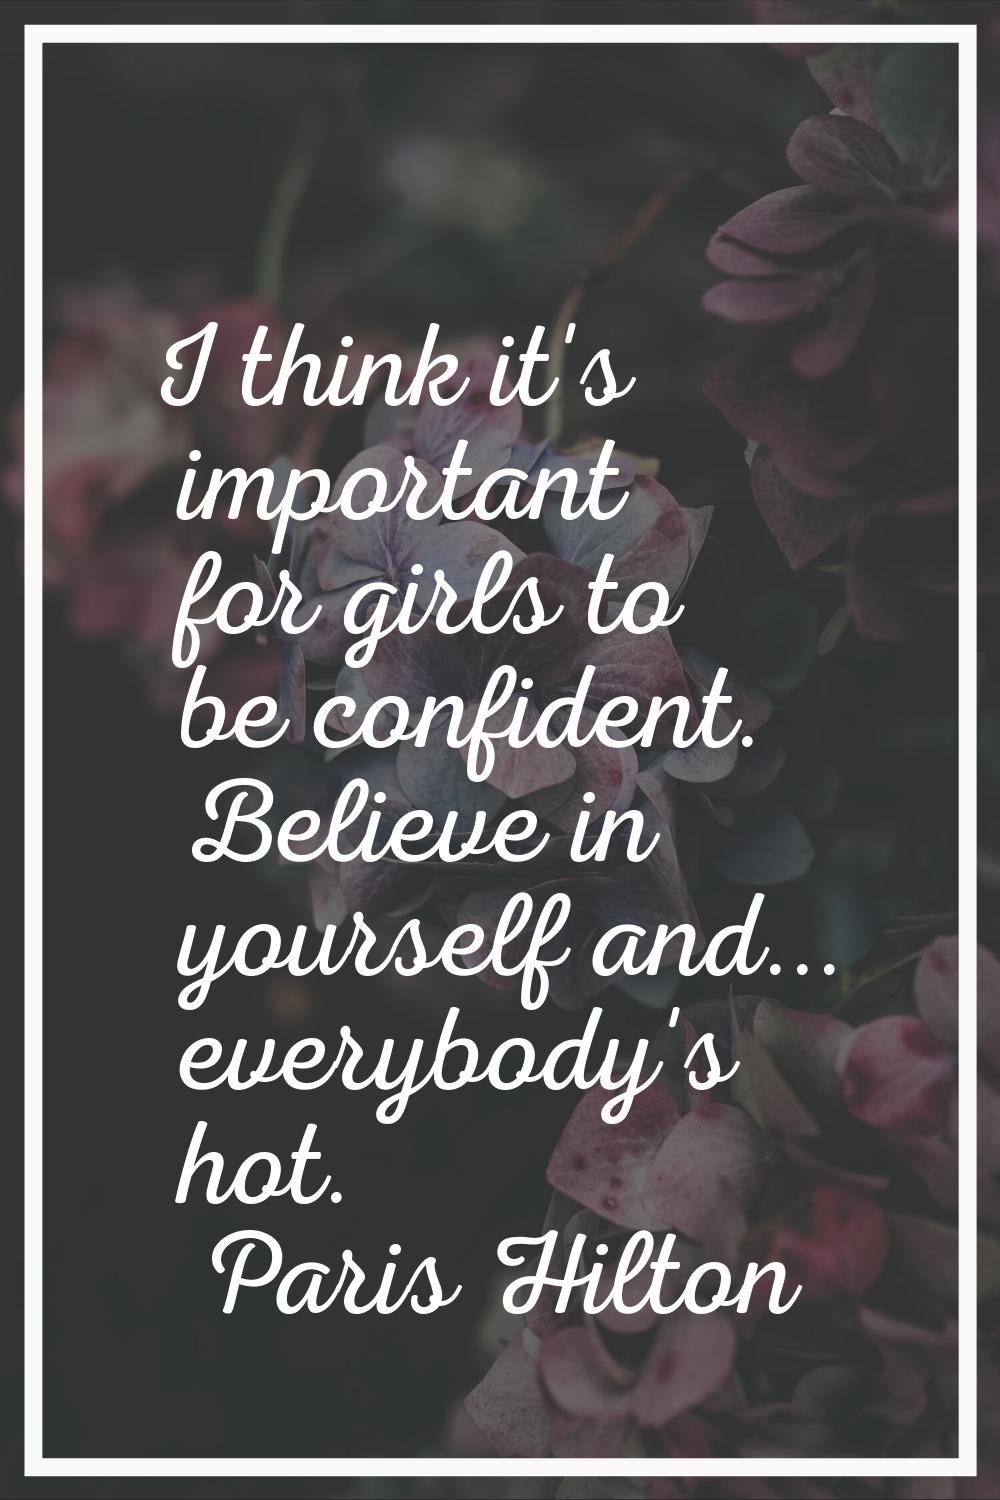 I think it's important for girls to be confident. Believe in yourself and... everybody's hot.